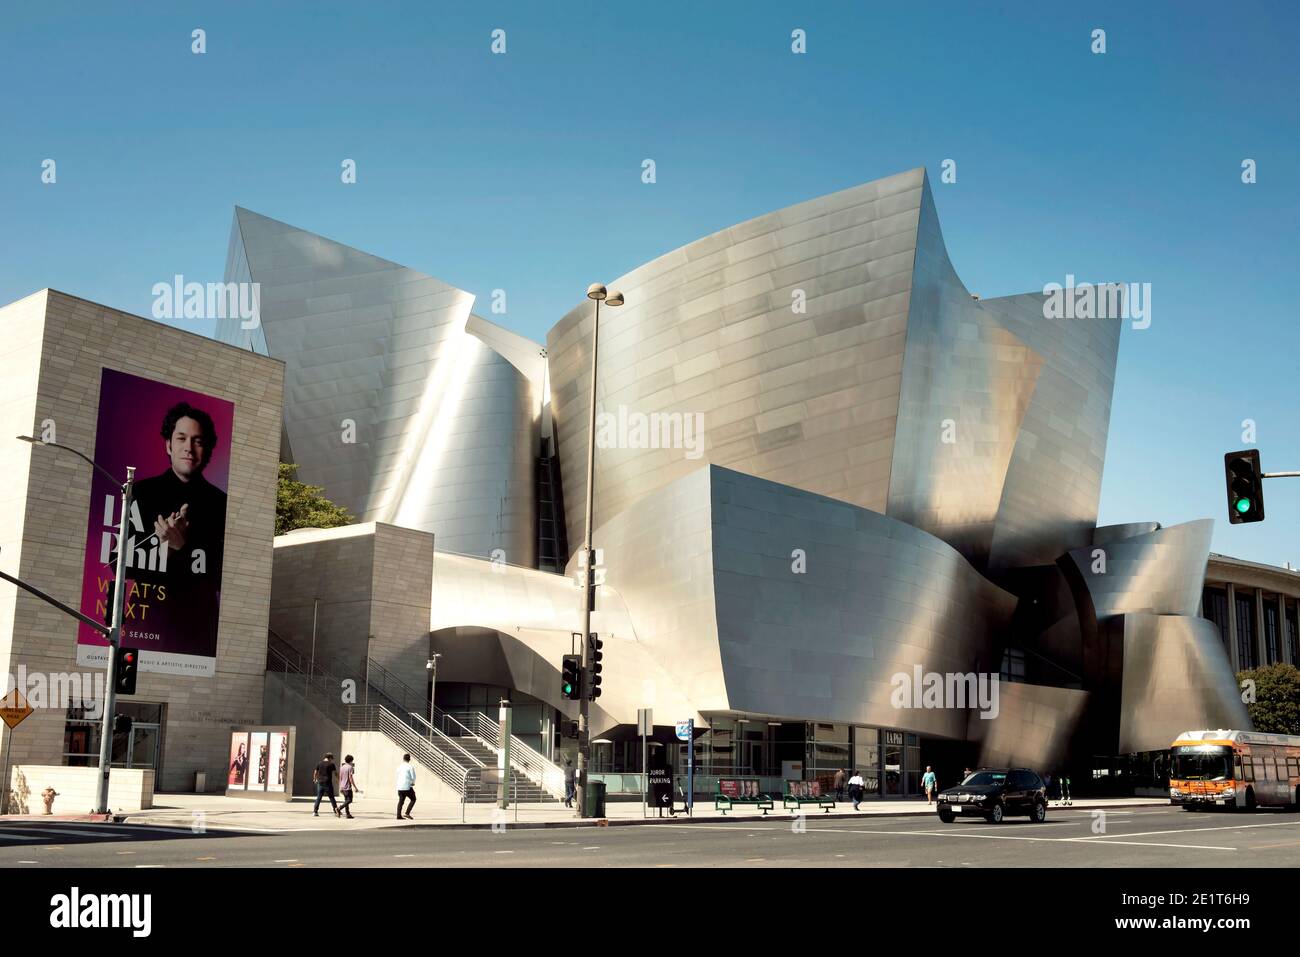 The Walt Disney Concert Hall / LA Phil designed by Frank Gehry. Los Angeles, California, USA. Aug 2019 Stock Photo